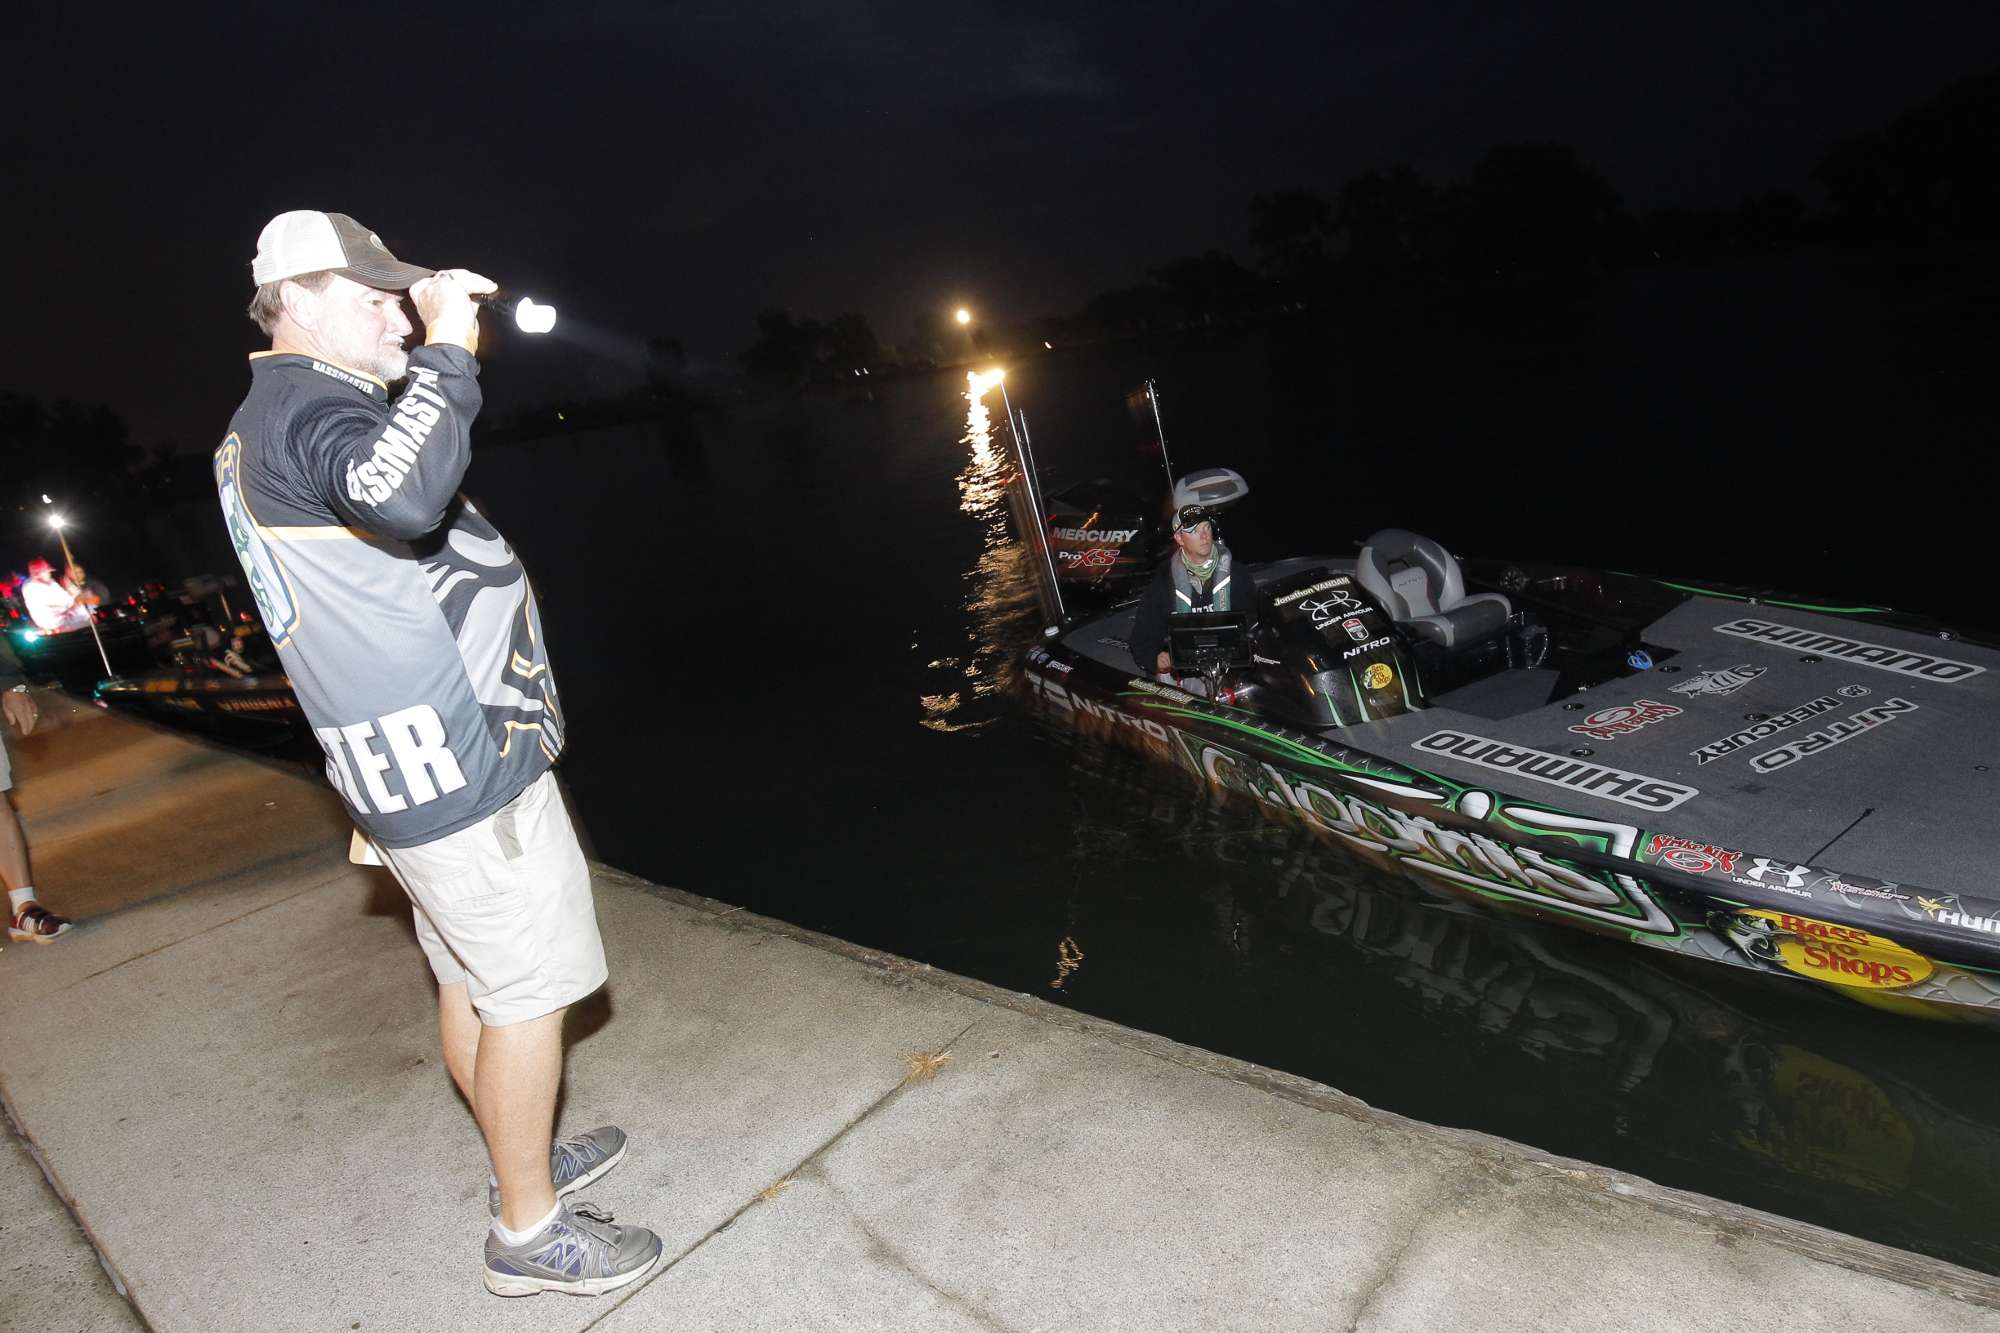 Max Leatherwood guides VanDam into his spot in line.